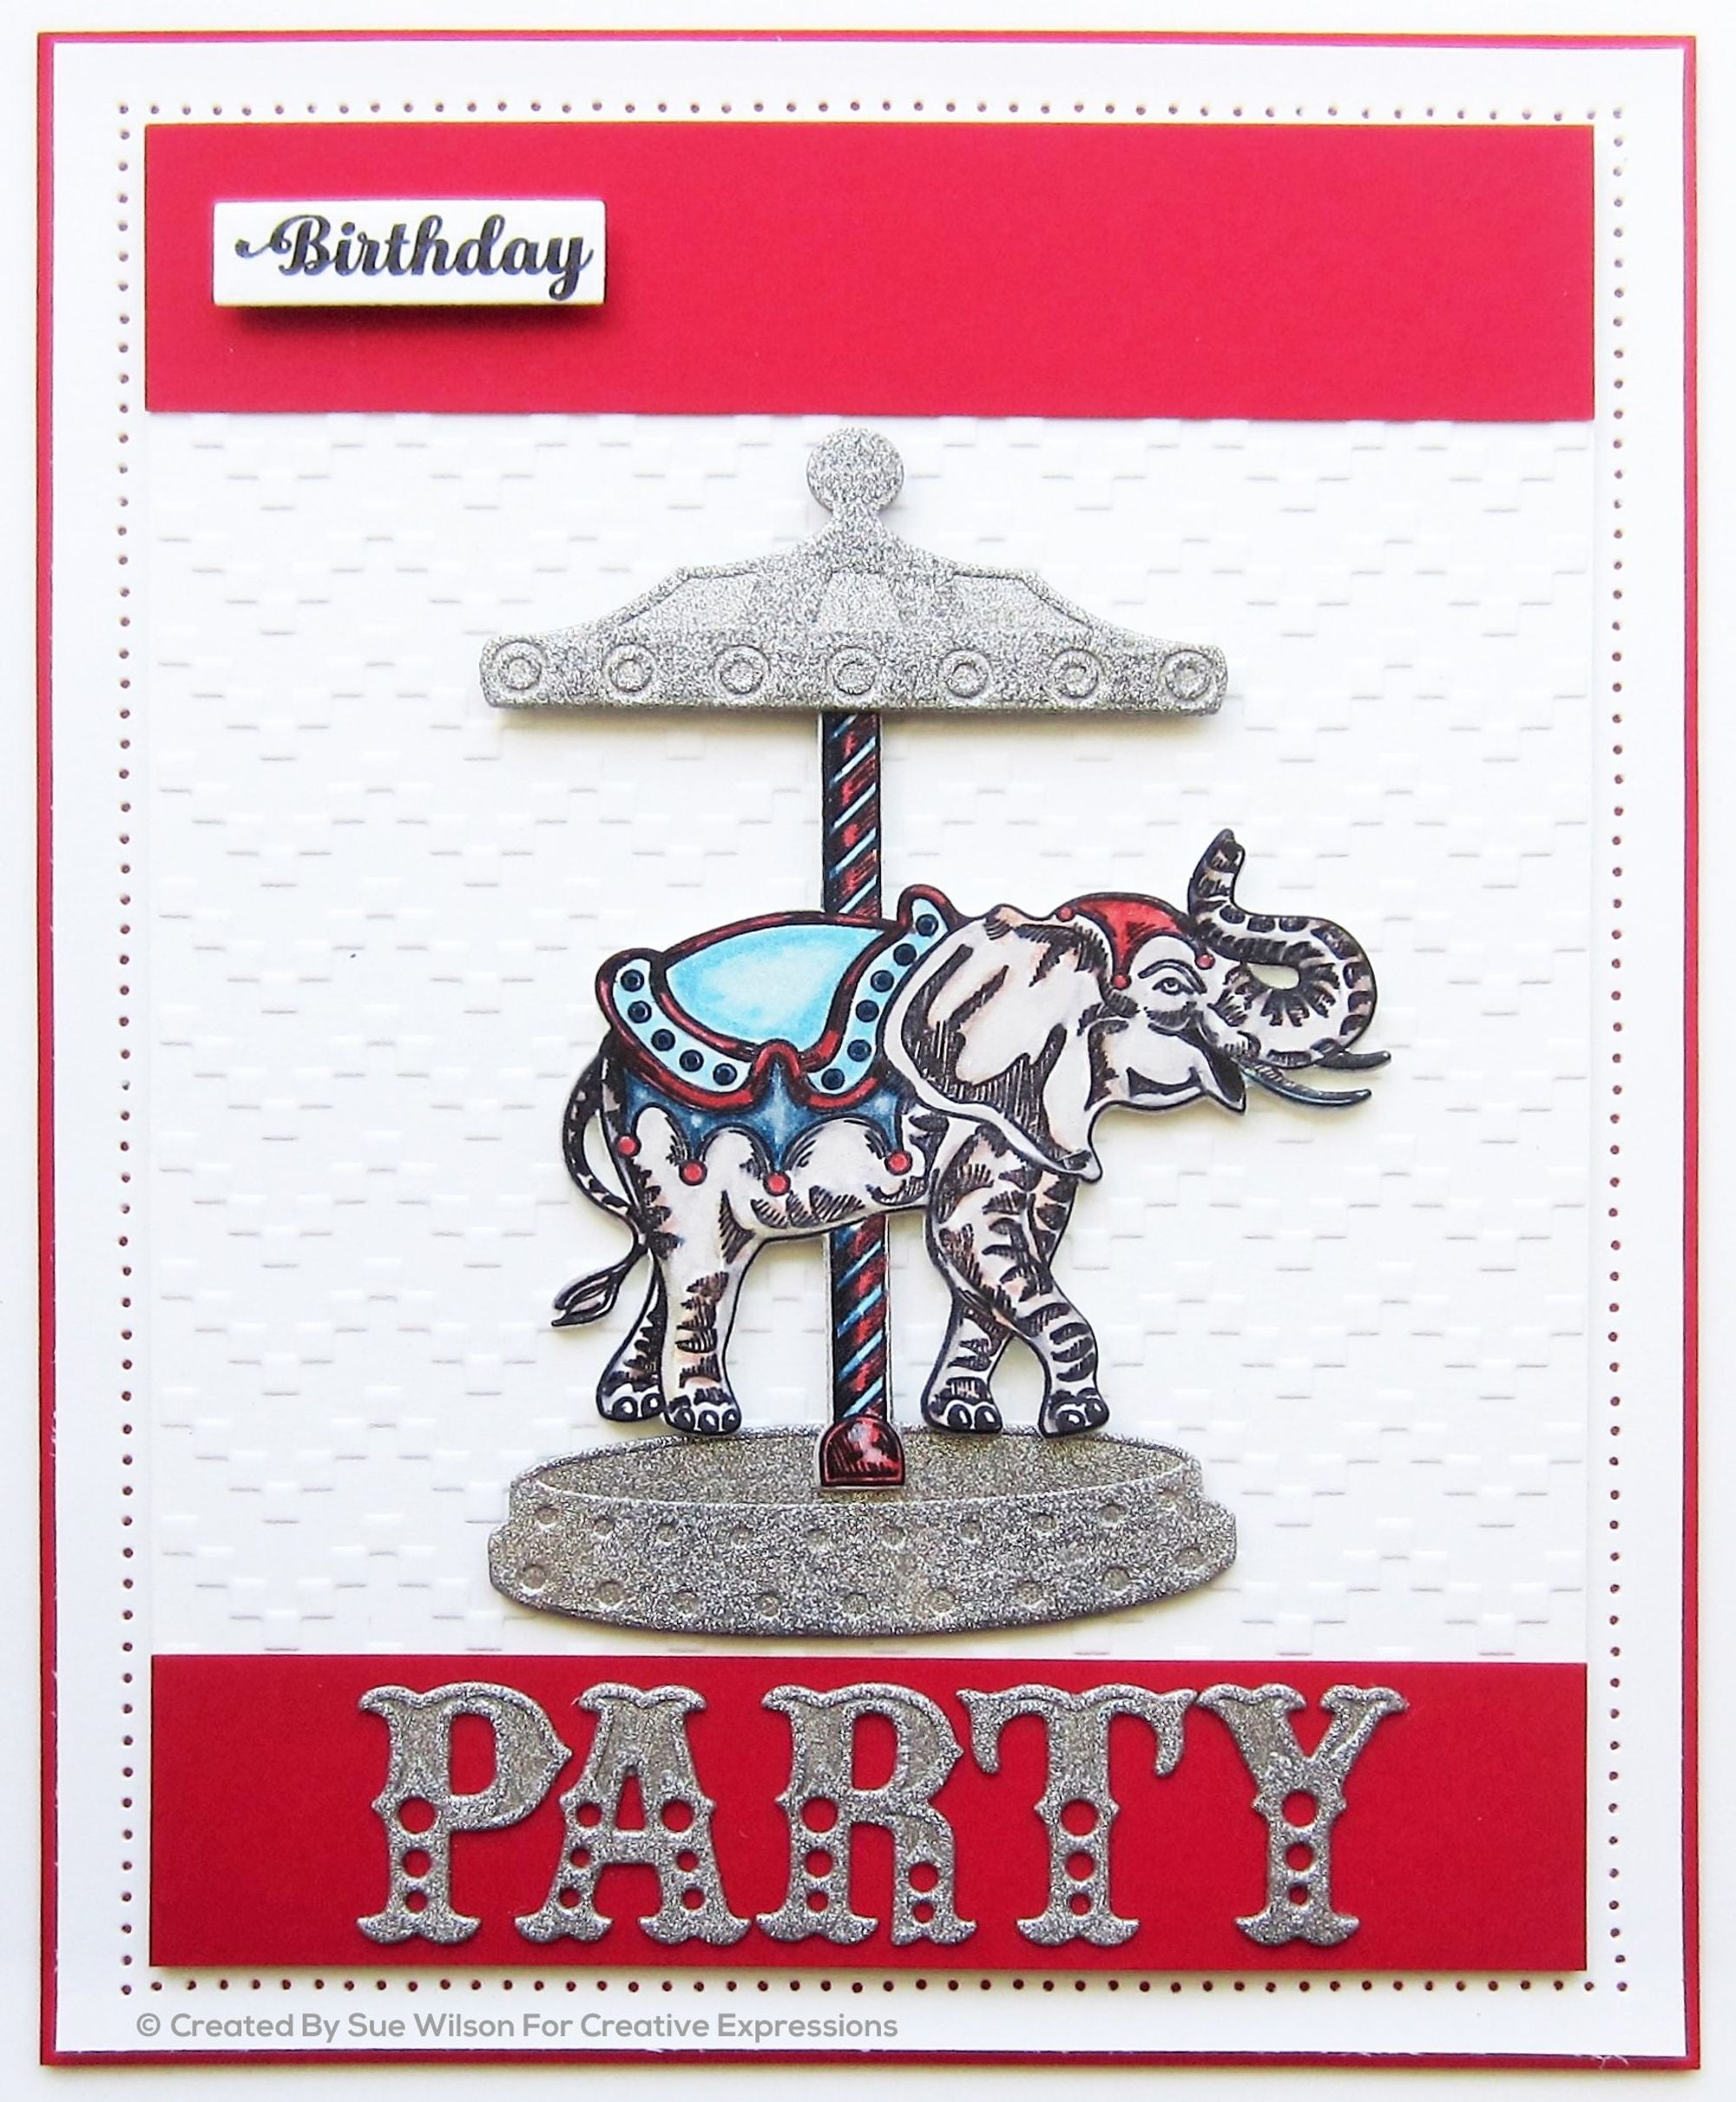 Carousel Horses Clear Stamp and Cutting Dies for Card Making,diy